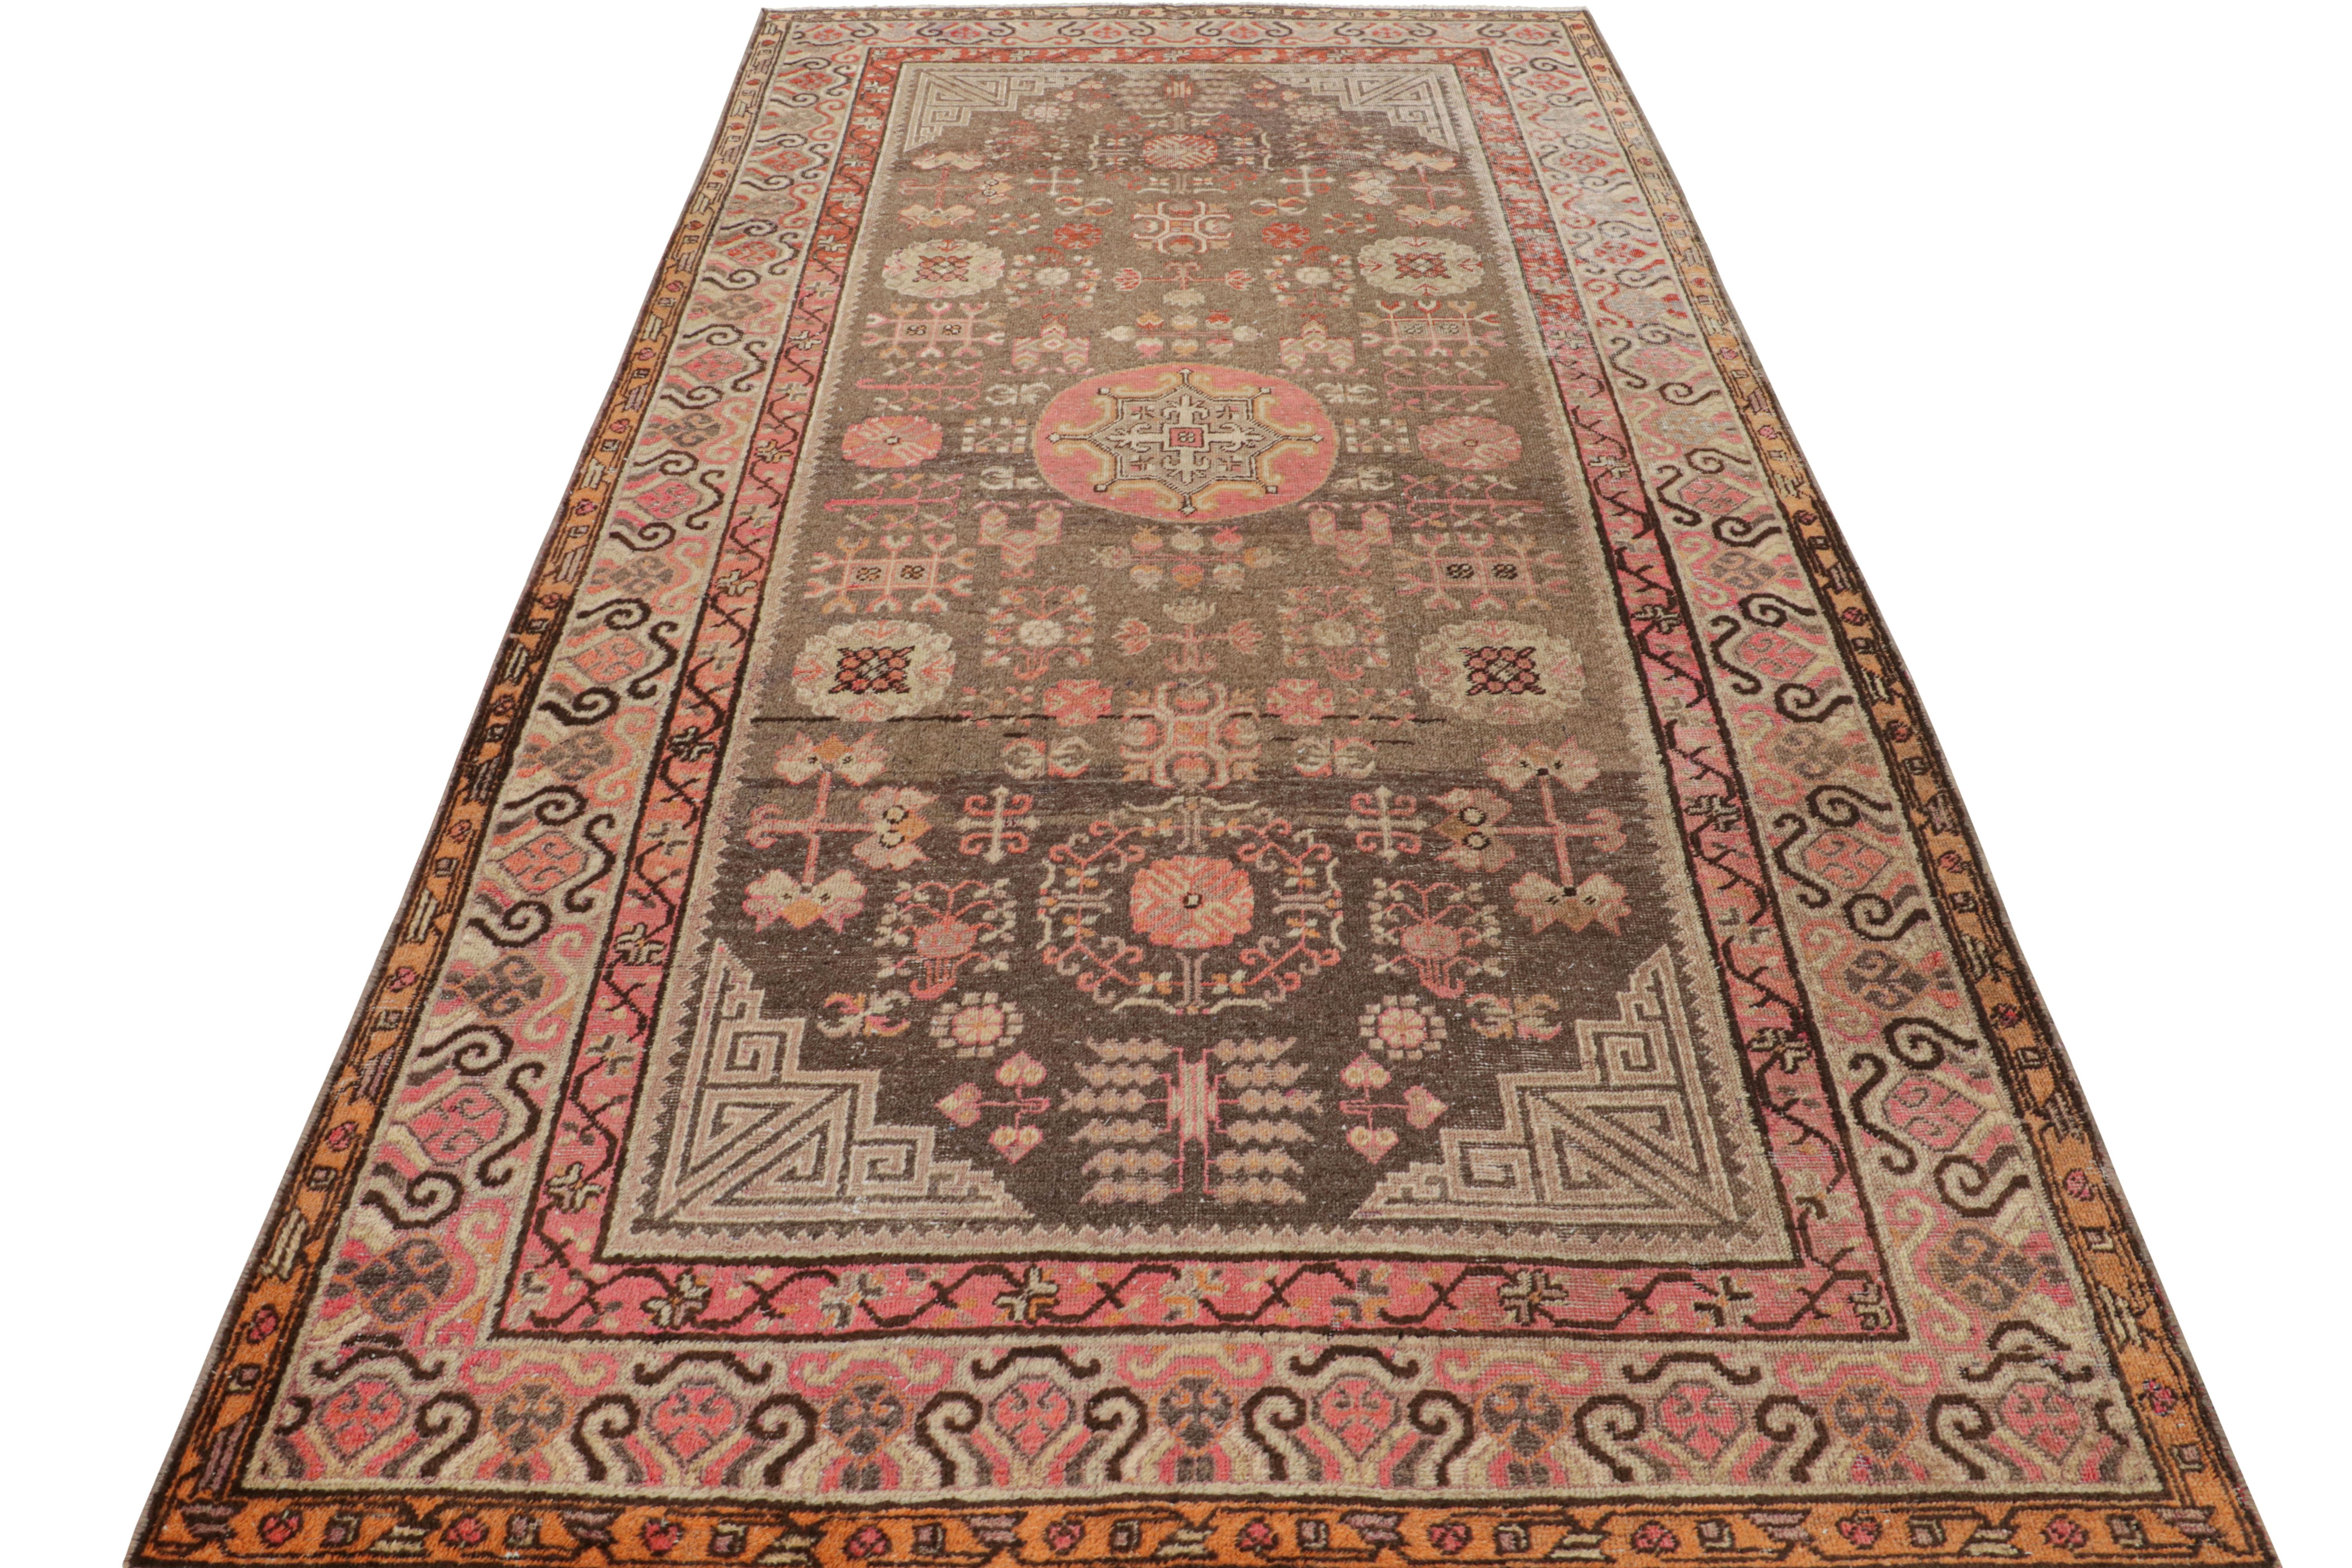 Hand-Knotted Antique Khotan Rug in Beige-Brown Medallion Pattern by Rug & Kilim In Good Condition For Sale In Long Island City, NY